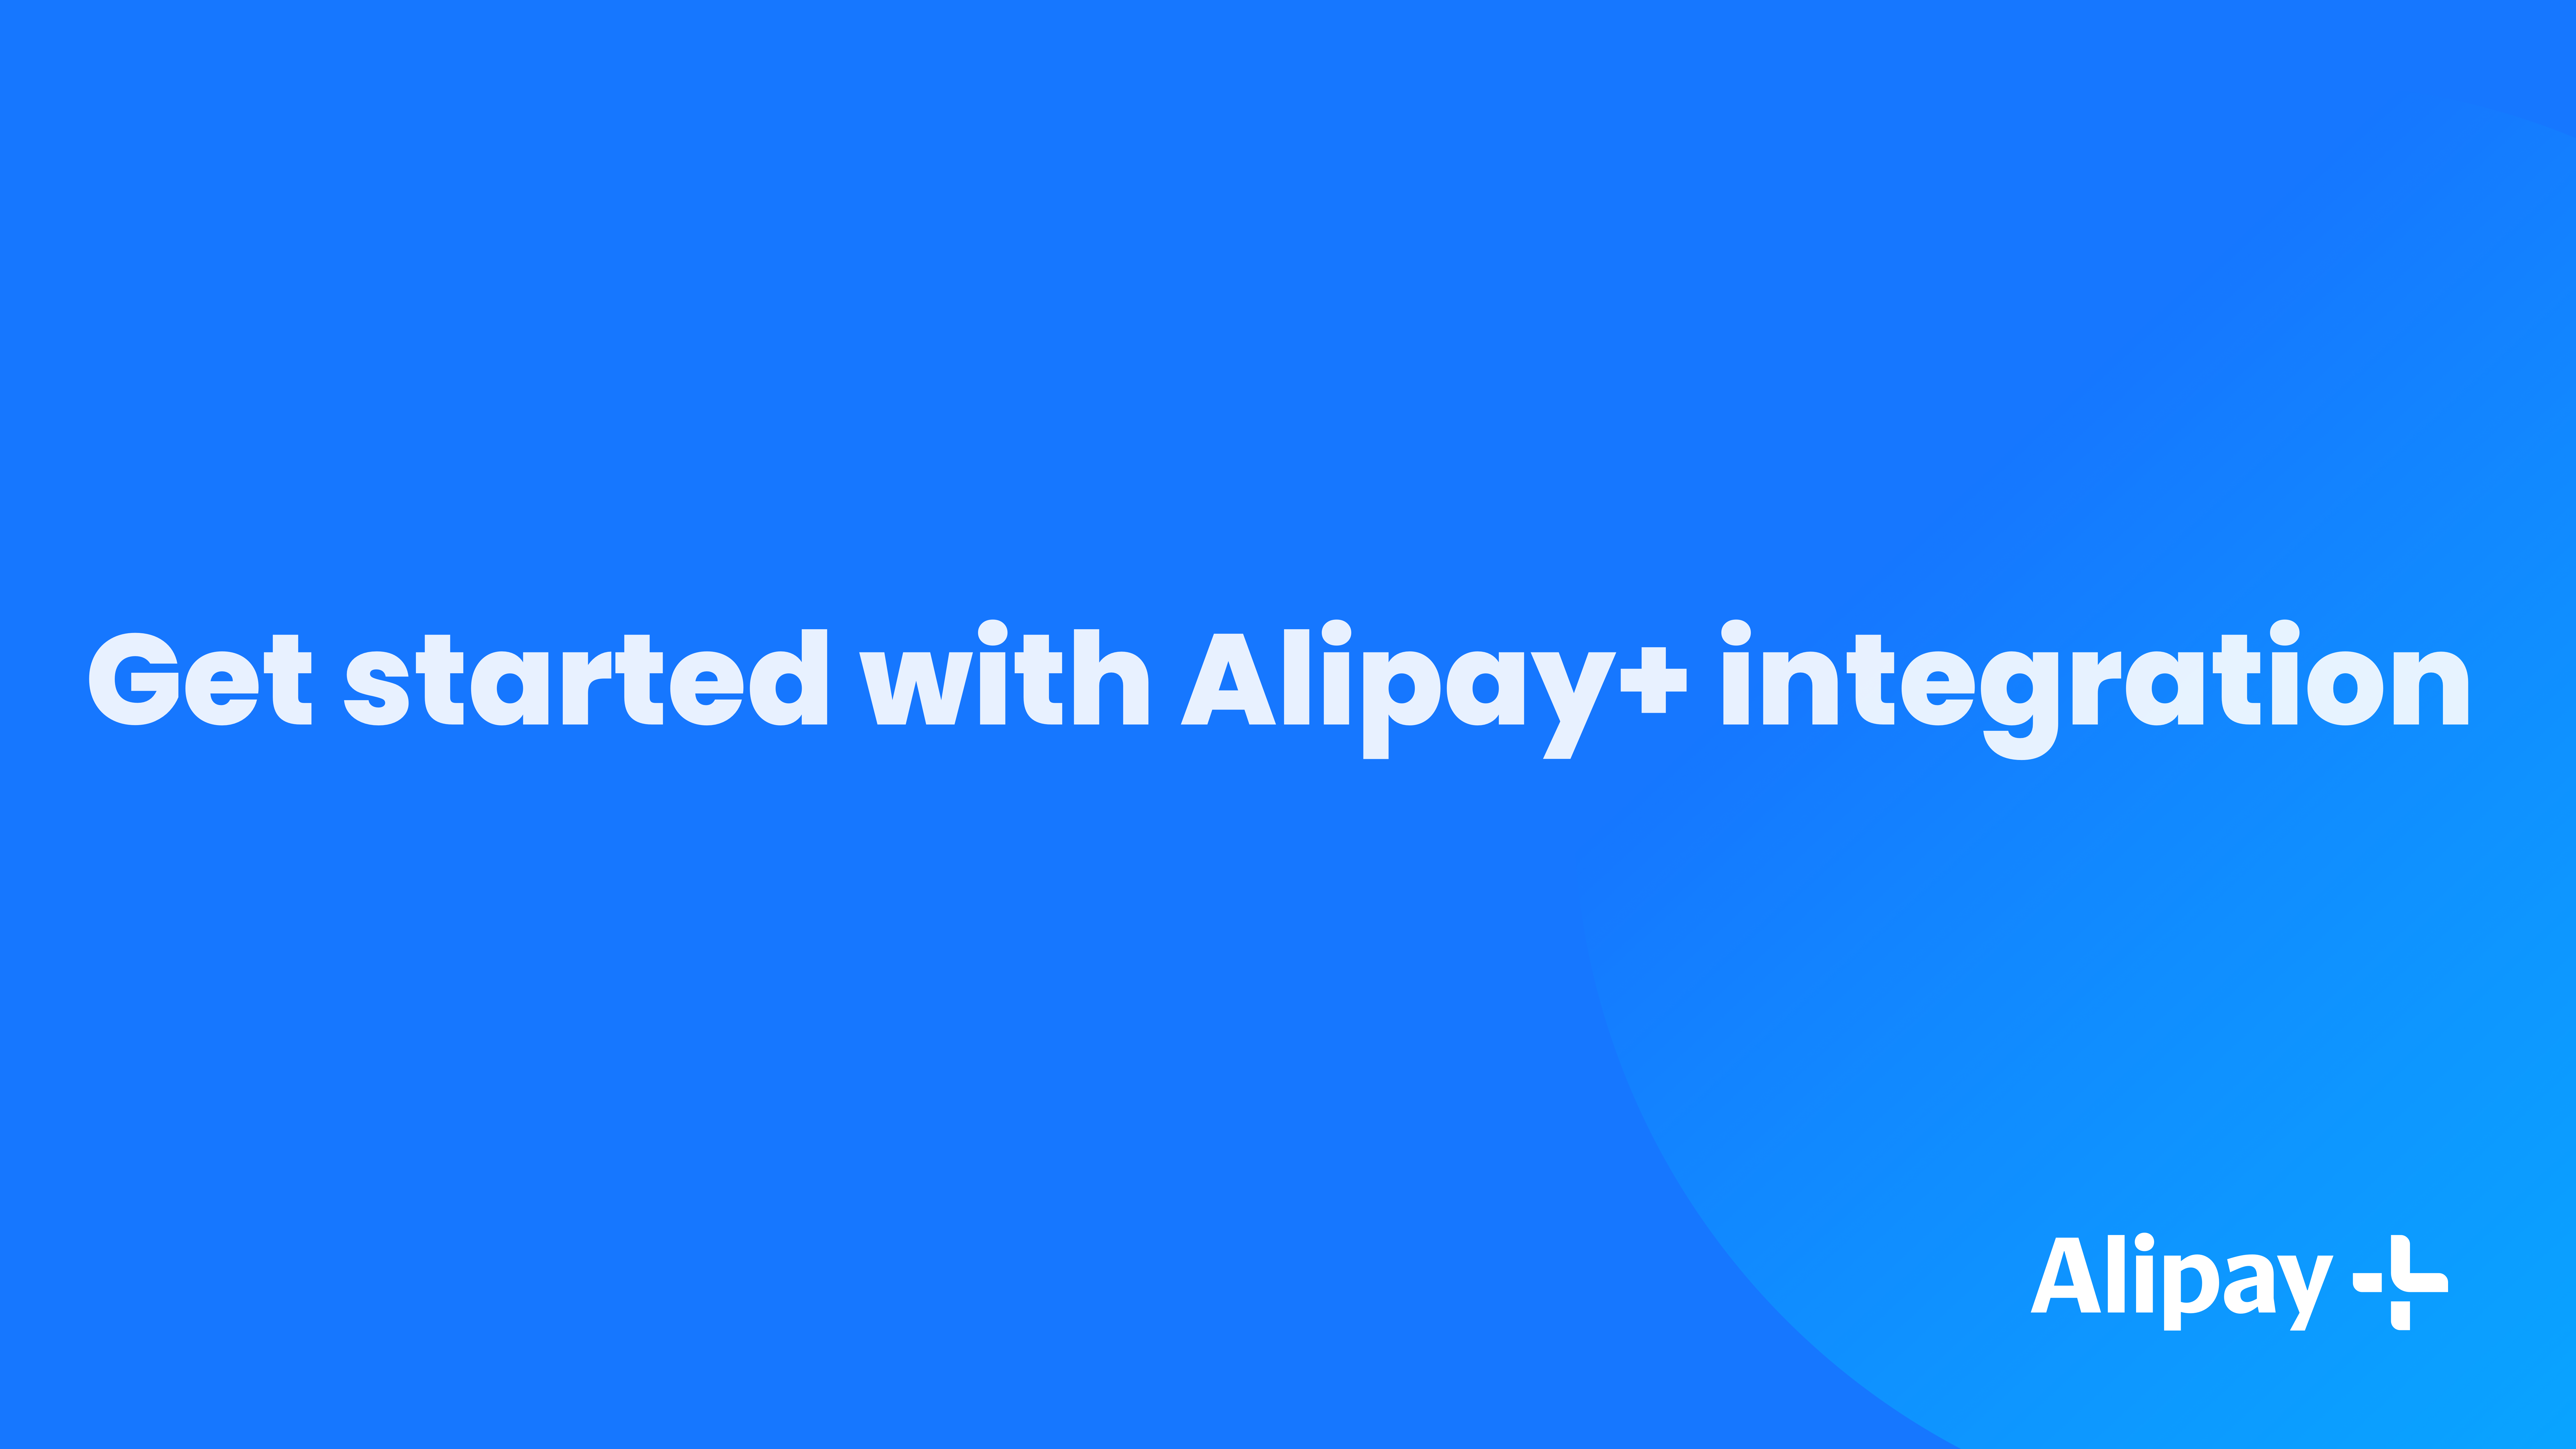 Get started with Alipay+ integration